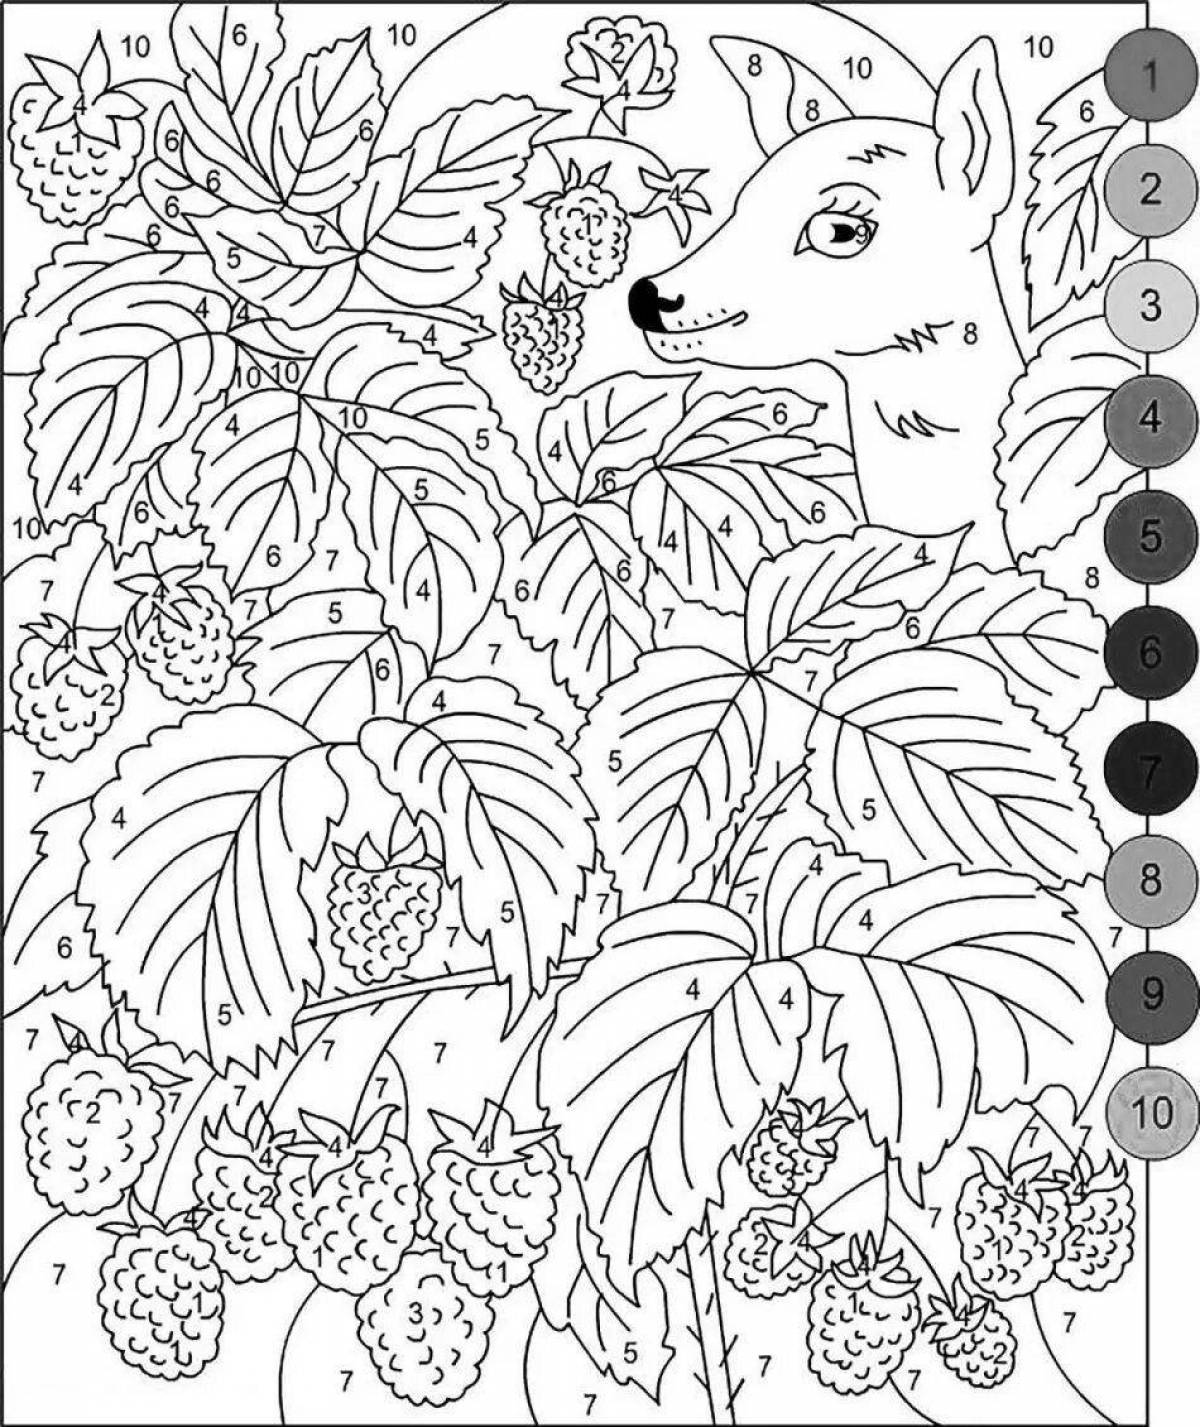 Colorful and fascinating paint by numbers coloring book